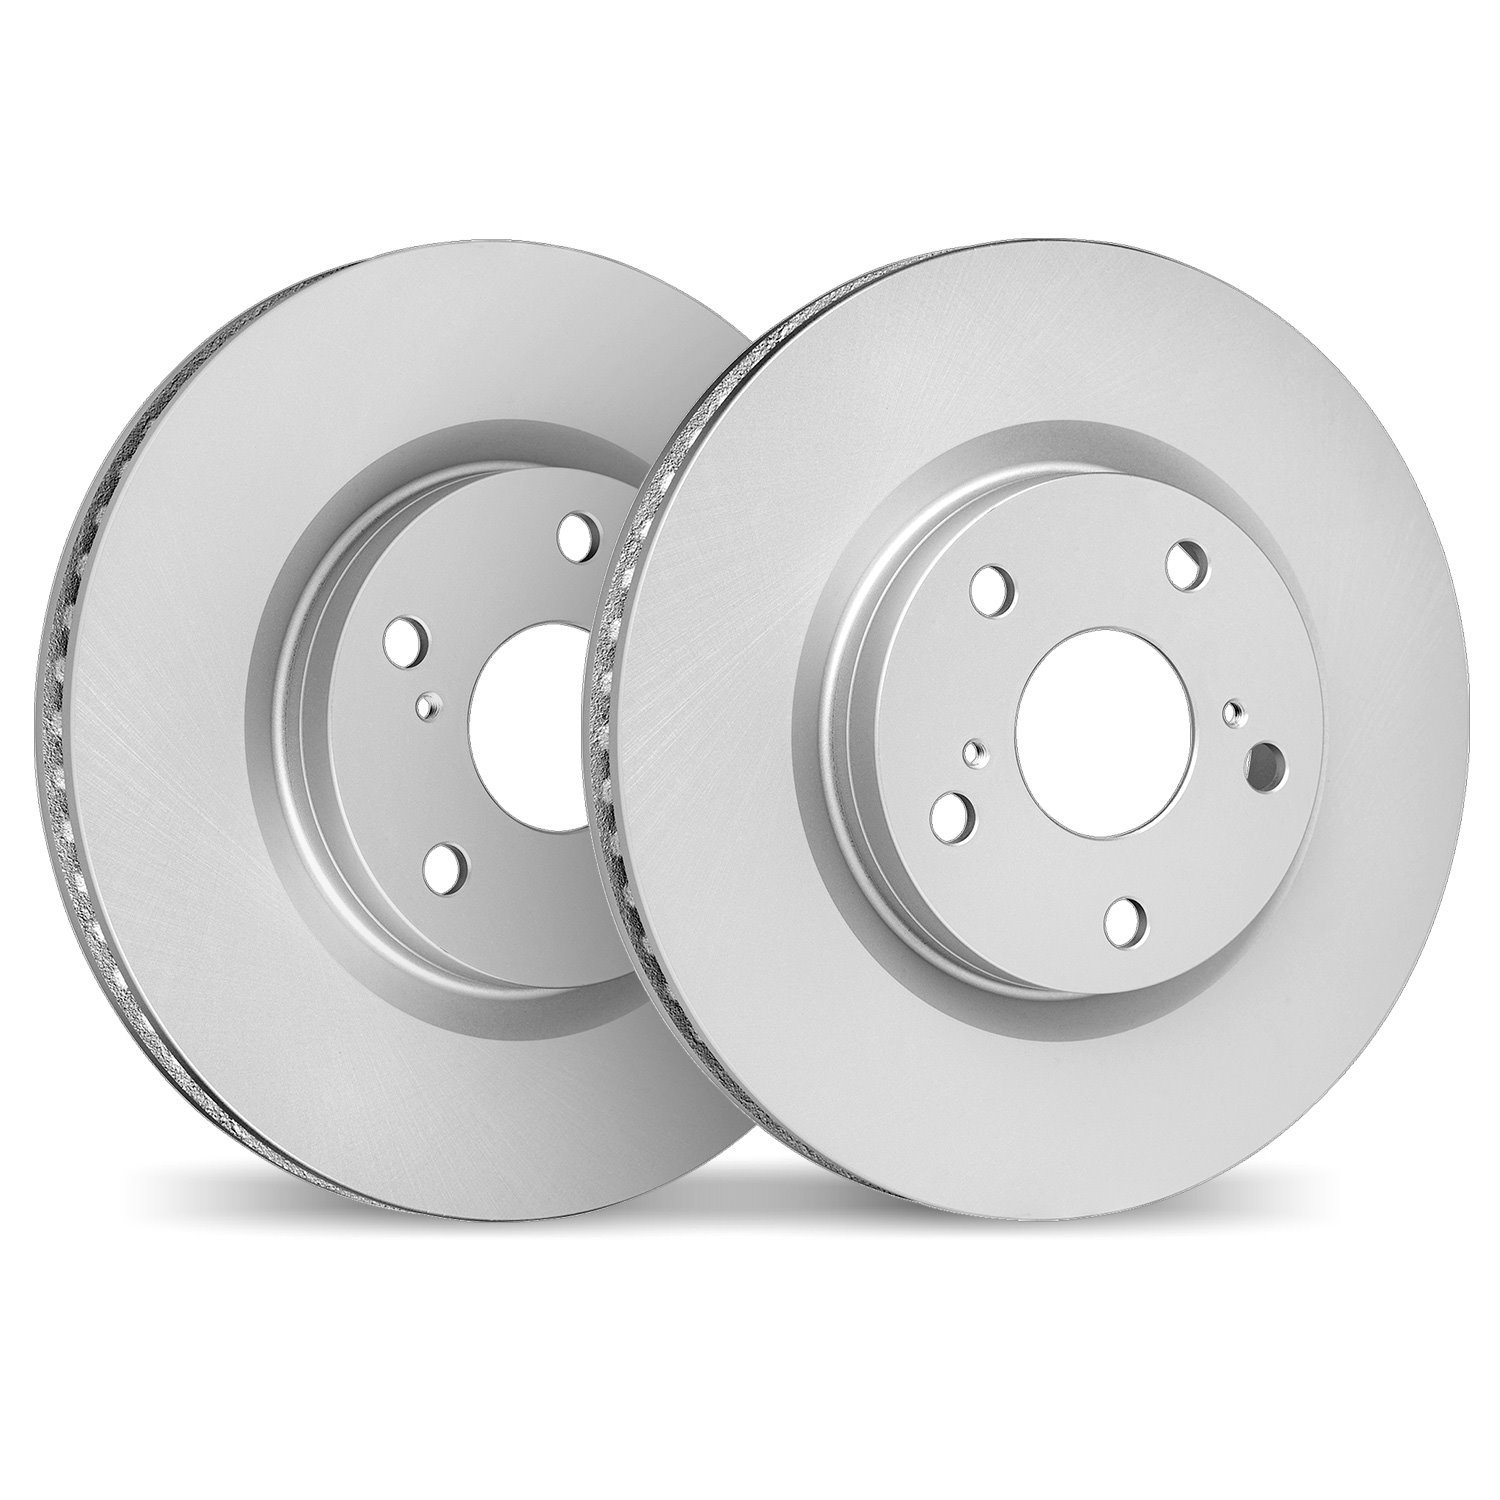 4002-54149 Geospec Brake Rotors, Fits Select Ford/Lincoln/Mercury/Mazda, Position: Front